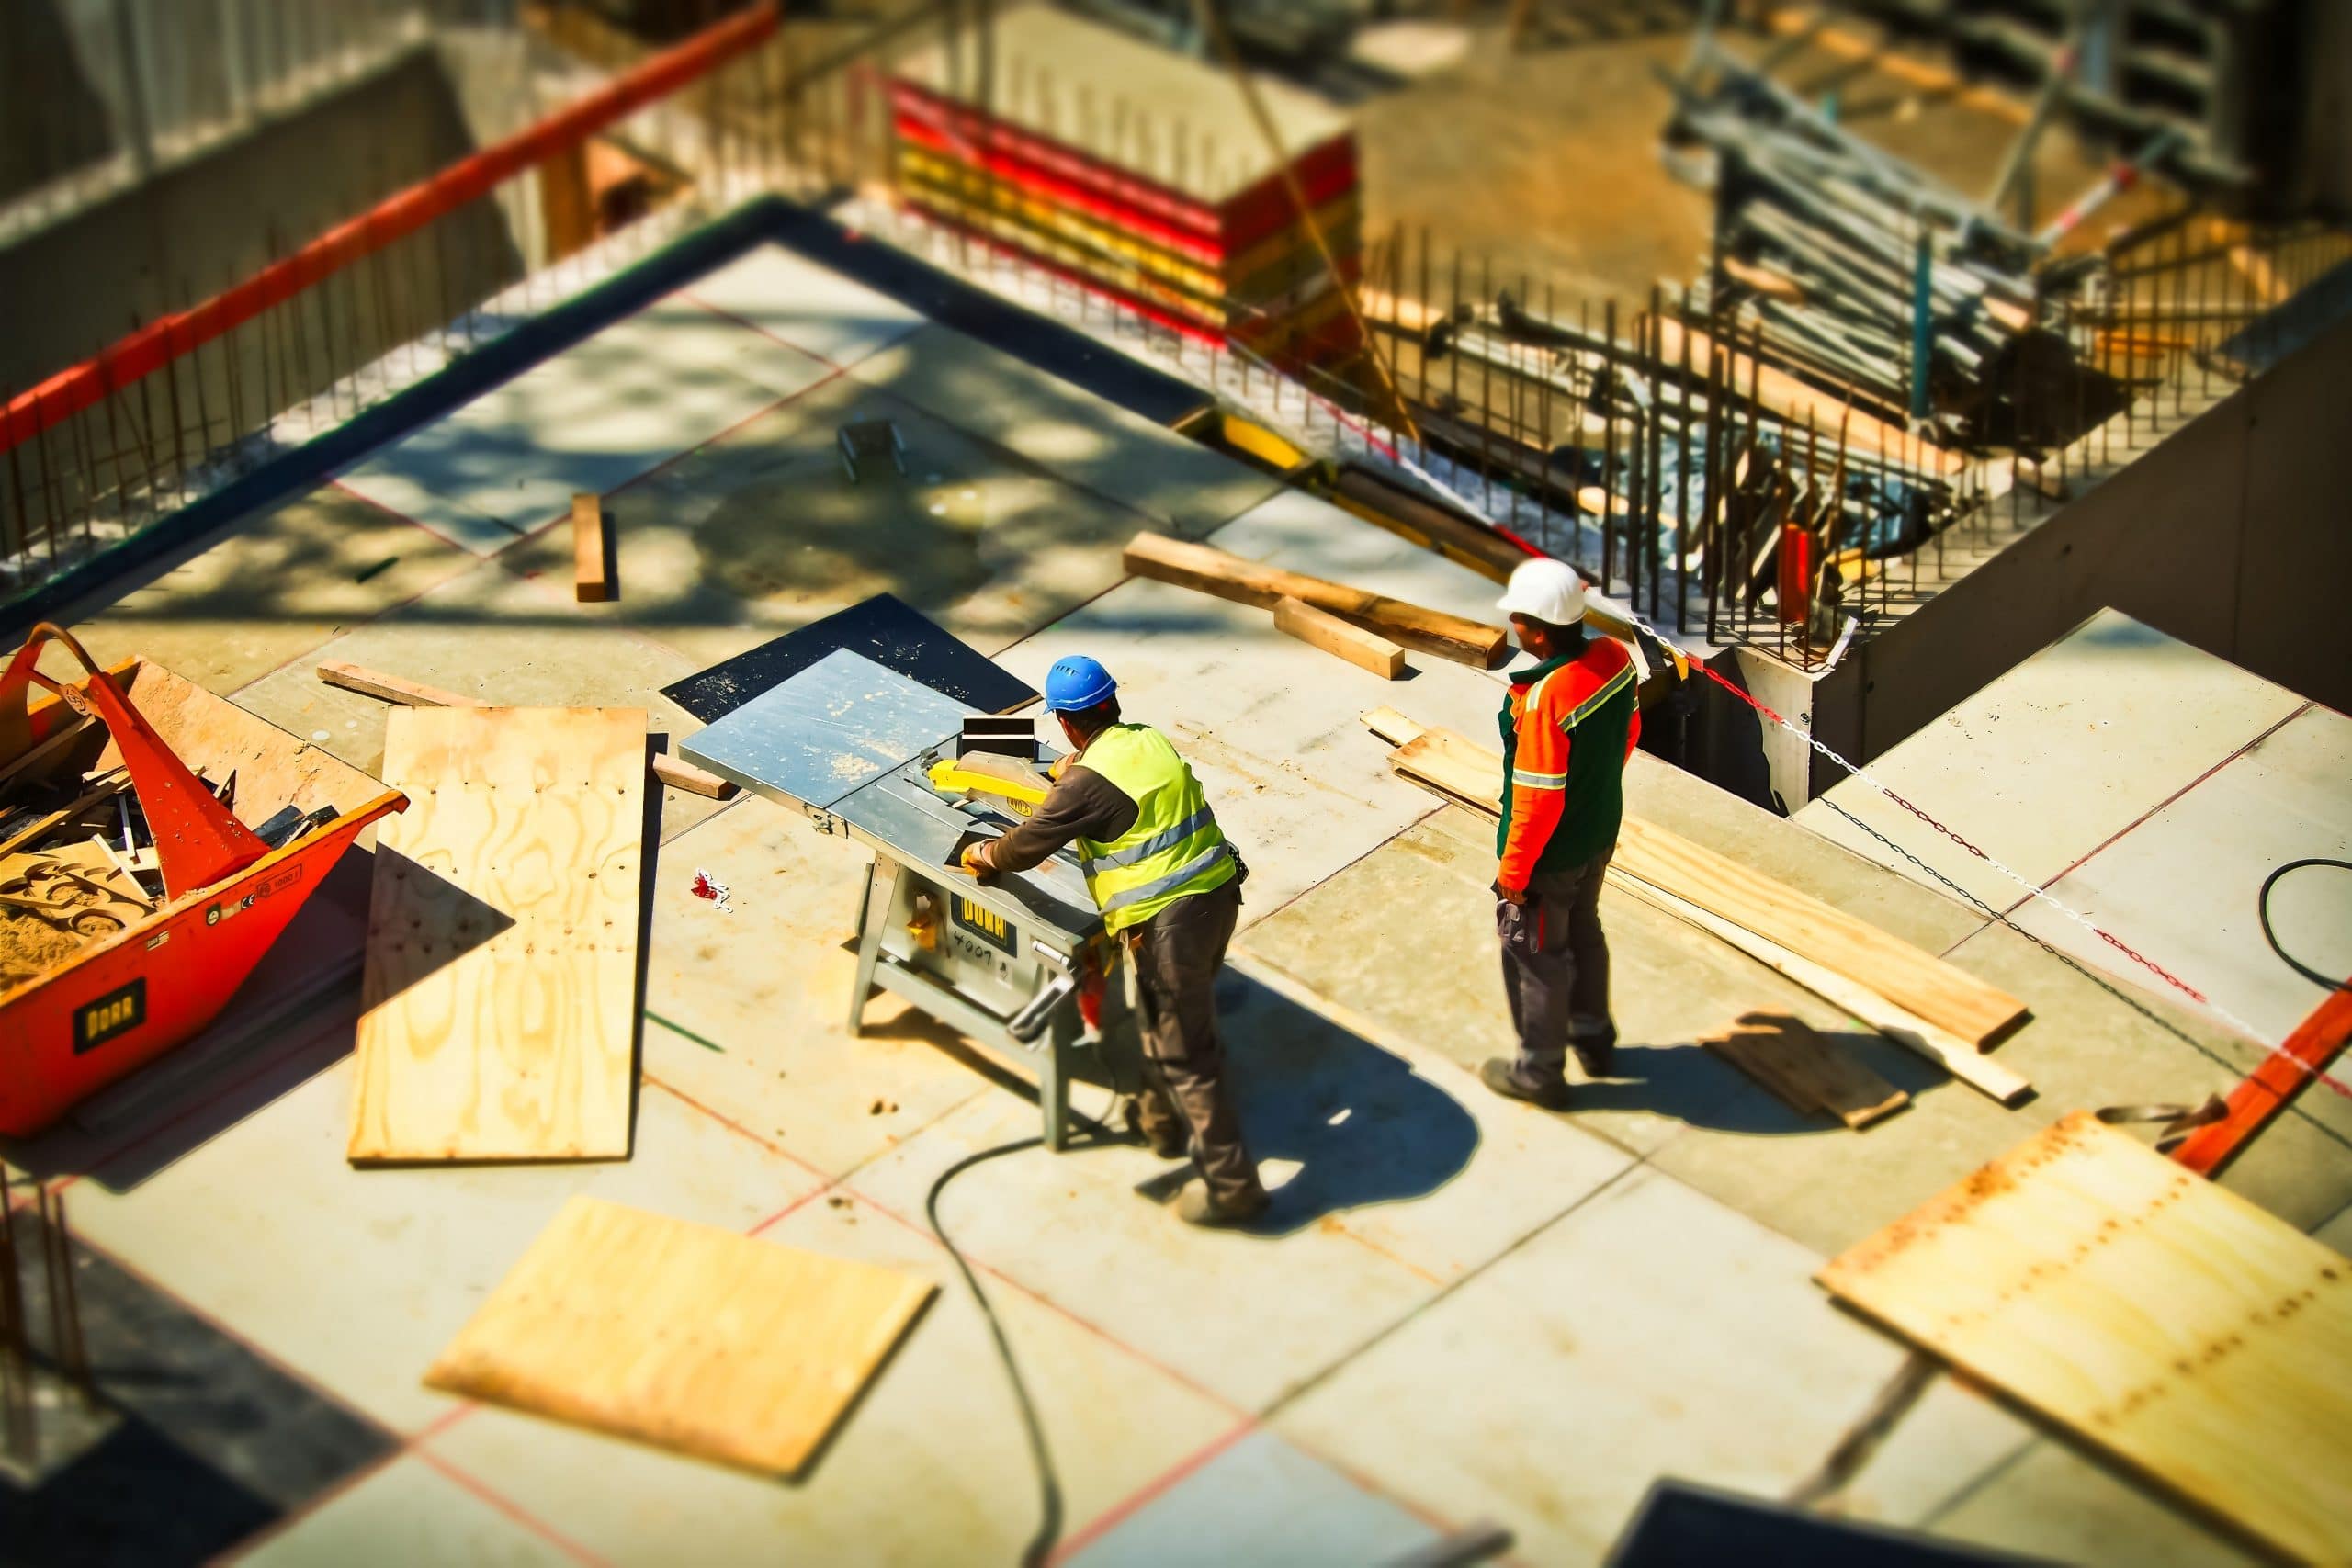 New York Construction Workers are covered by Workers' Compensation insurance in case of a personal injury accident